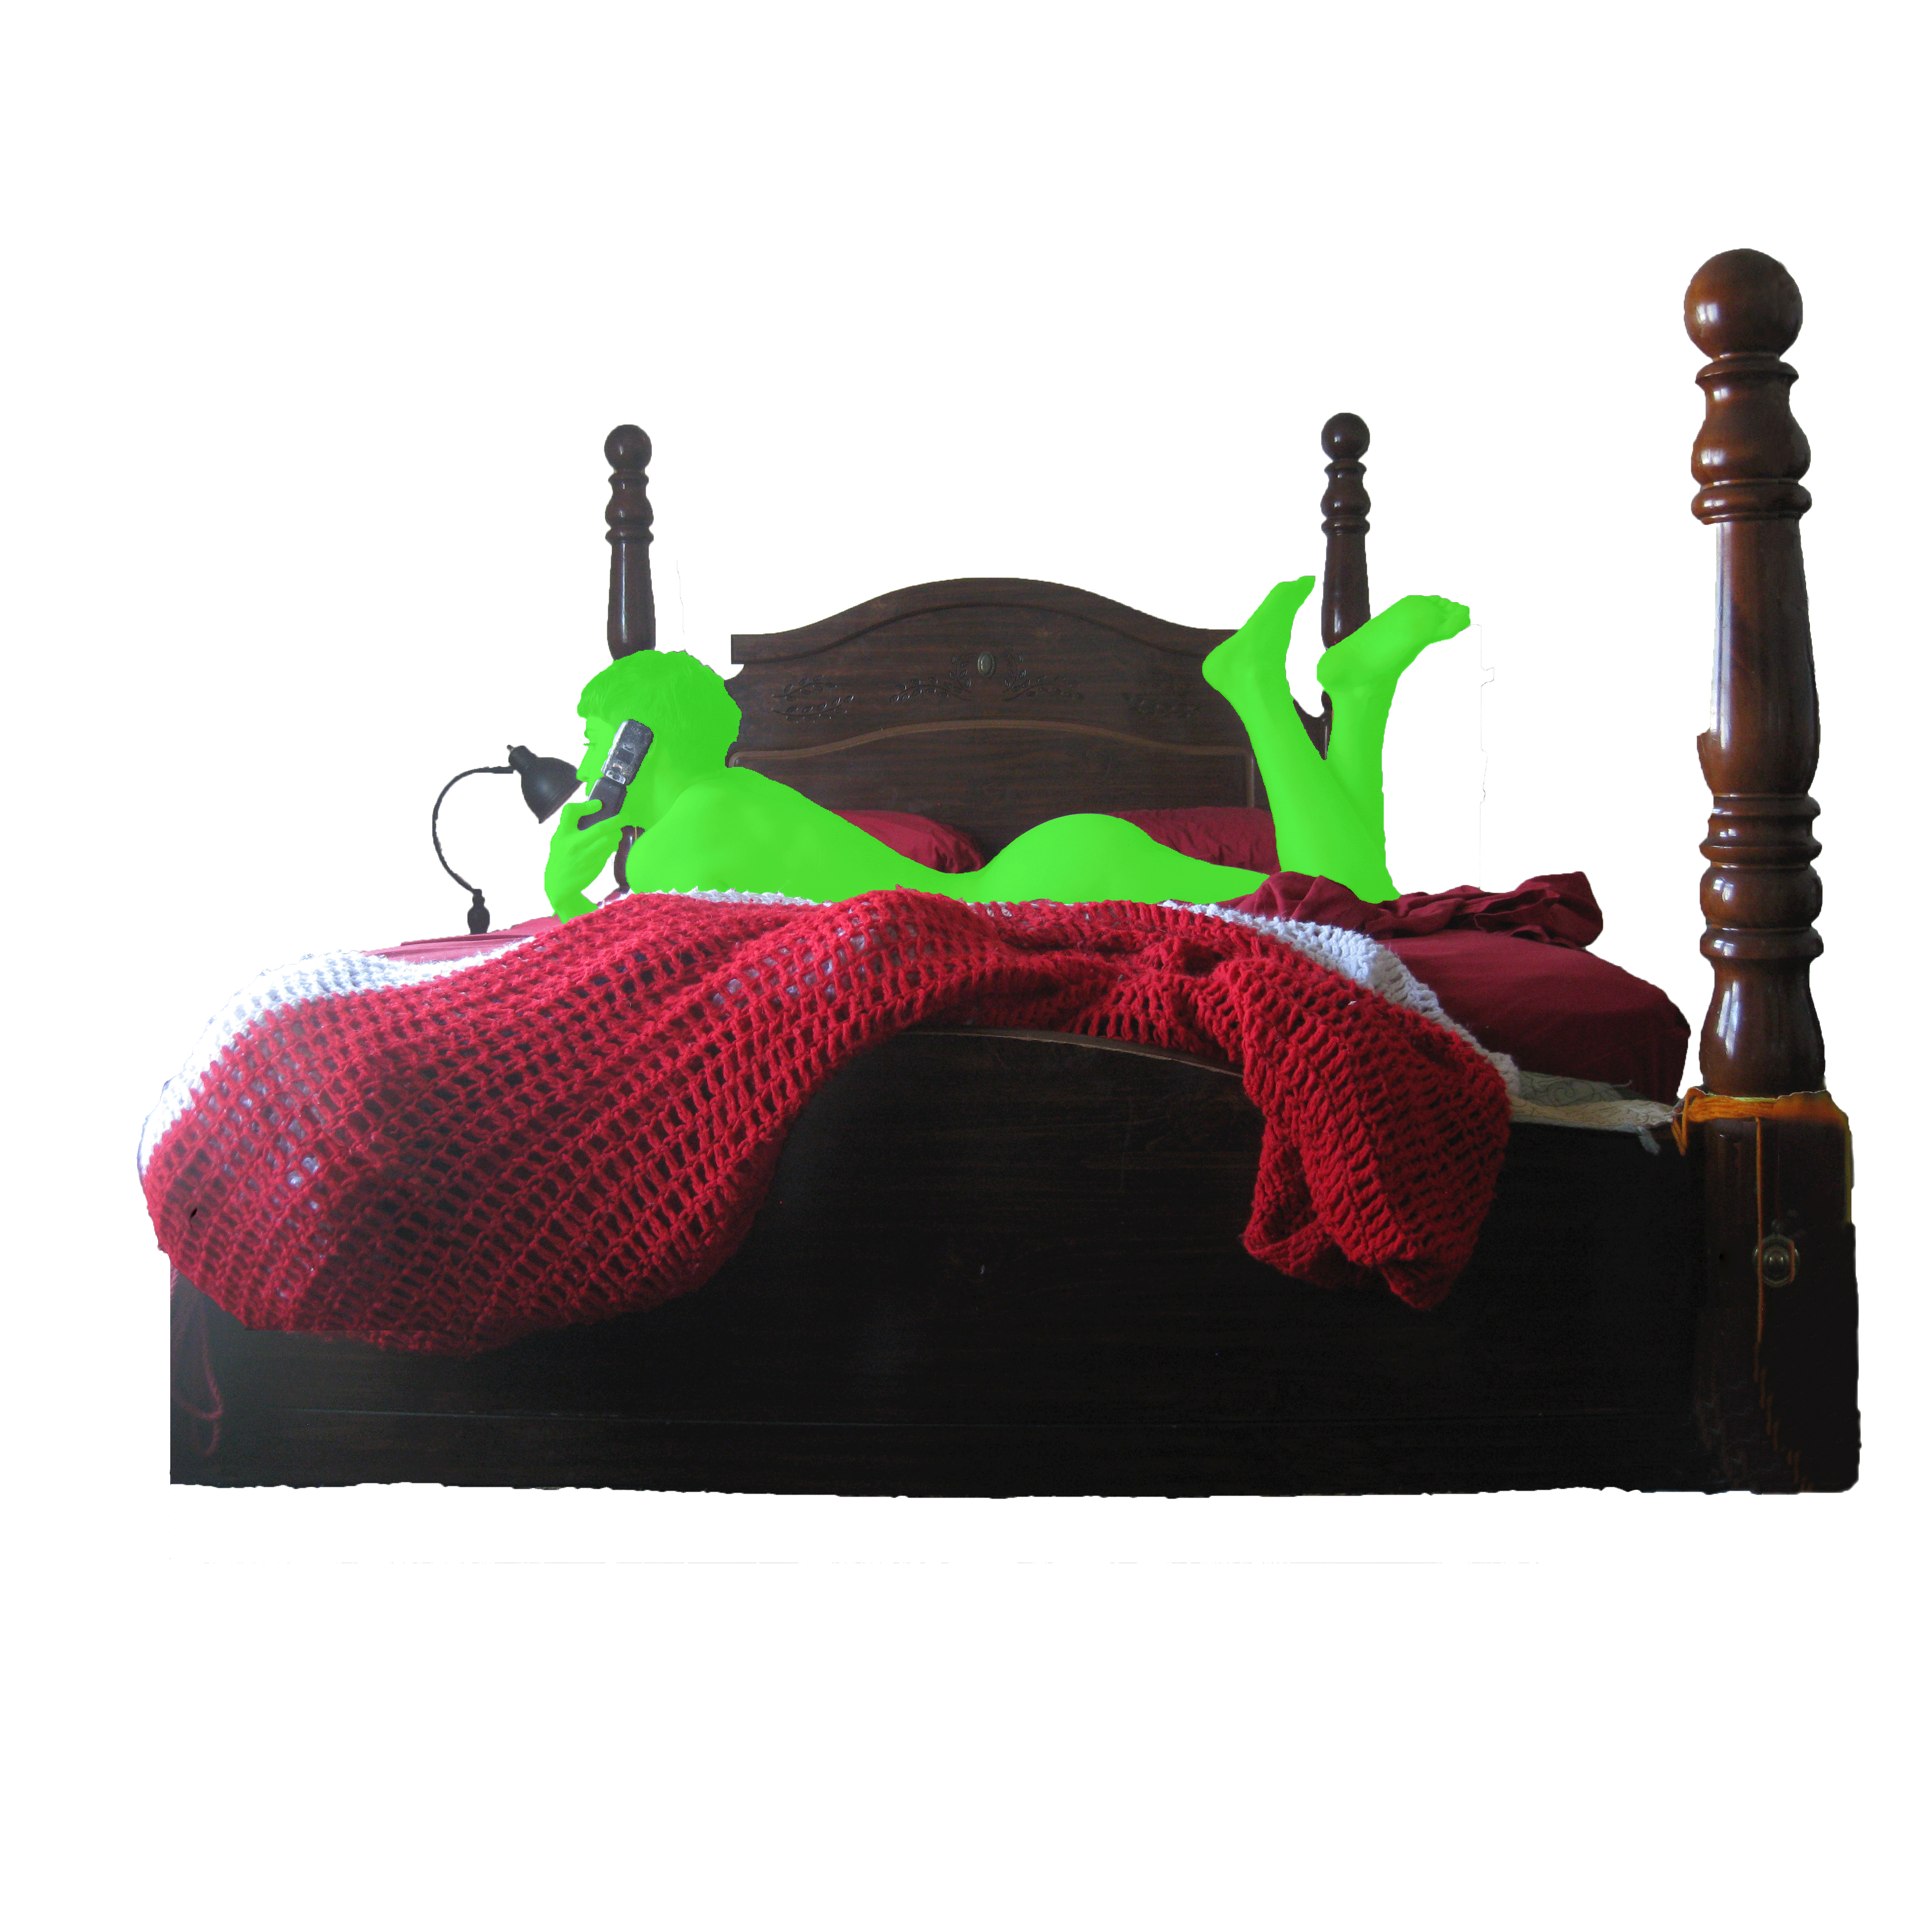 a green figure on a wooden bed animated flashing